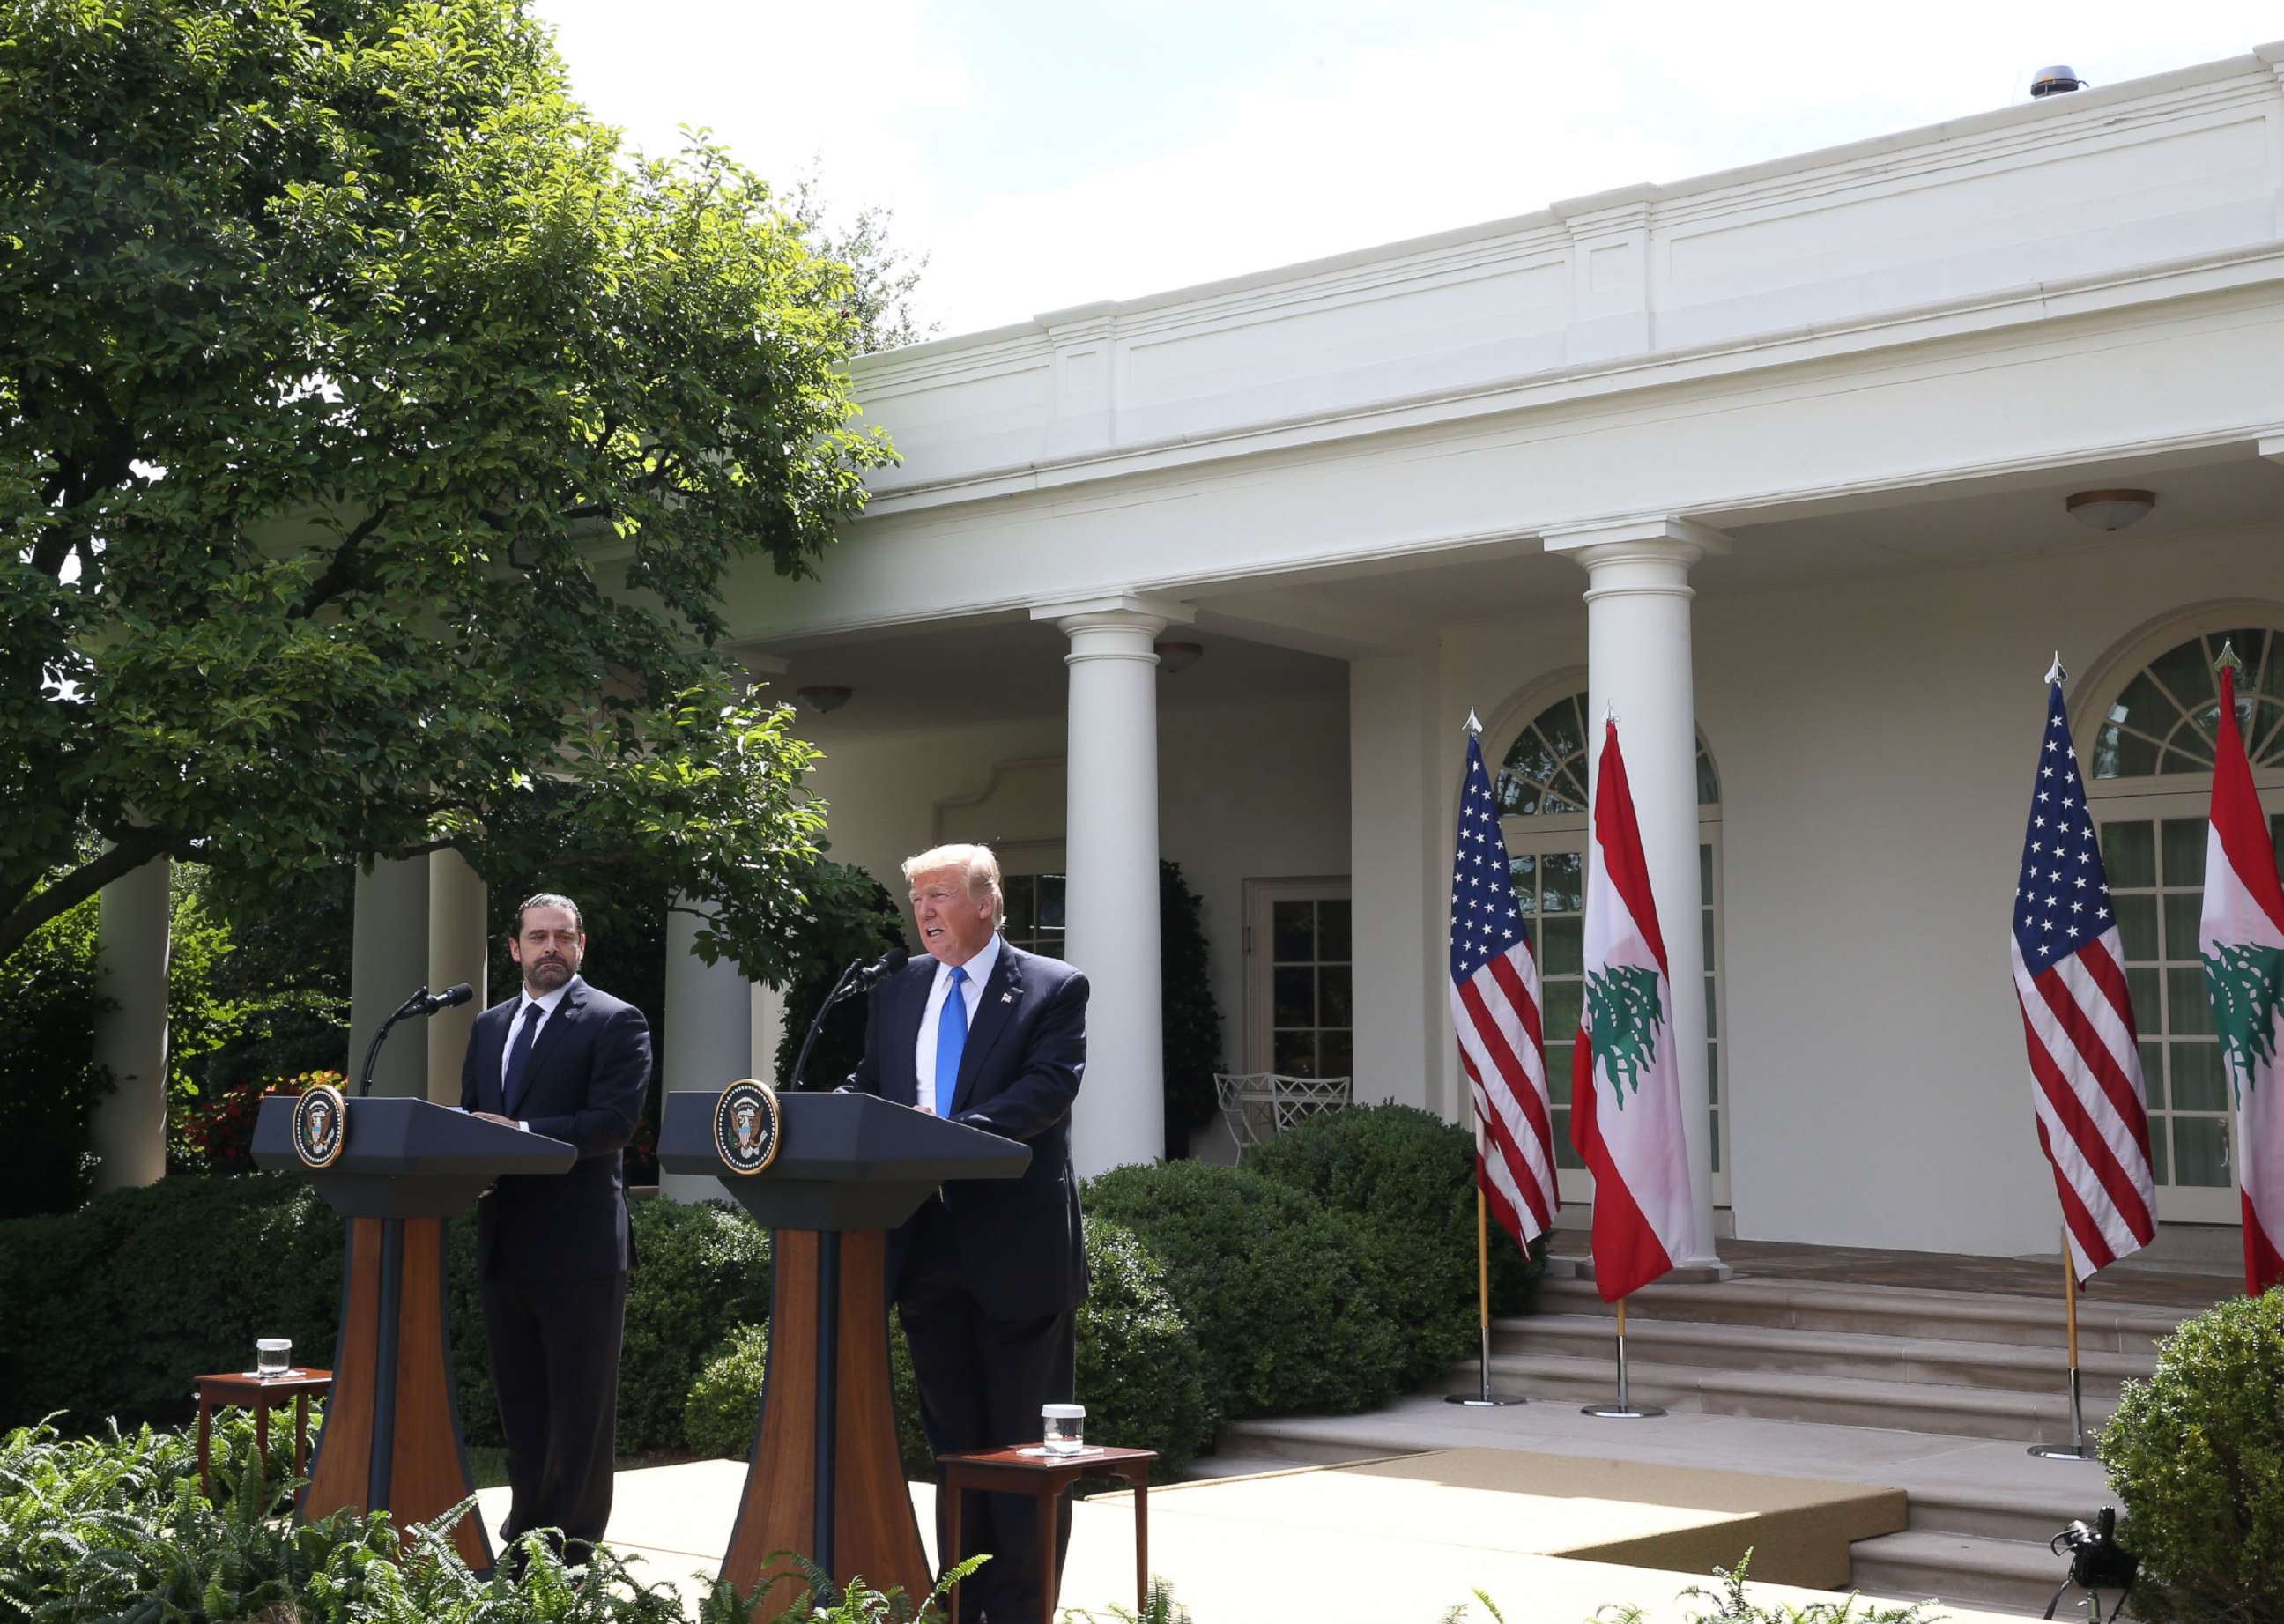 PHOTO: President Donald Trump holds a news conference with Prime Minister of Lebanon Saad Hariri, in the Rose Garden at the White House on July 25, 2017 in Washington.